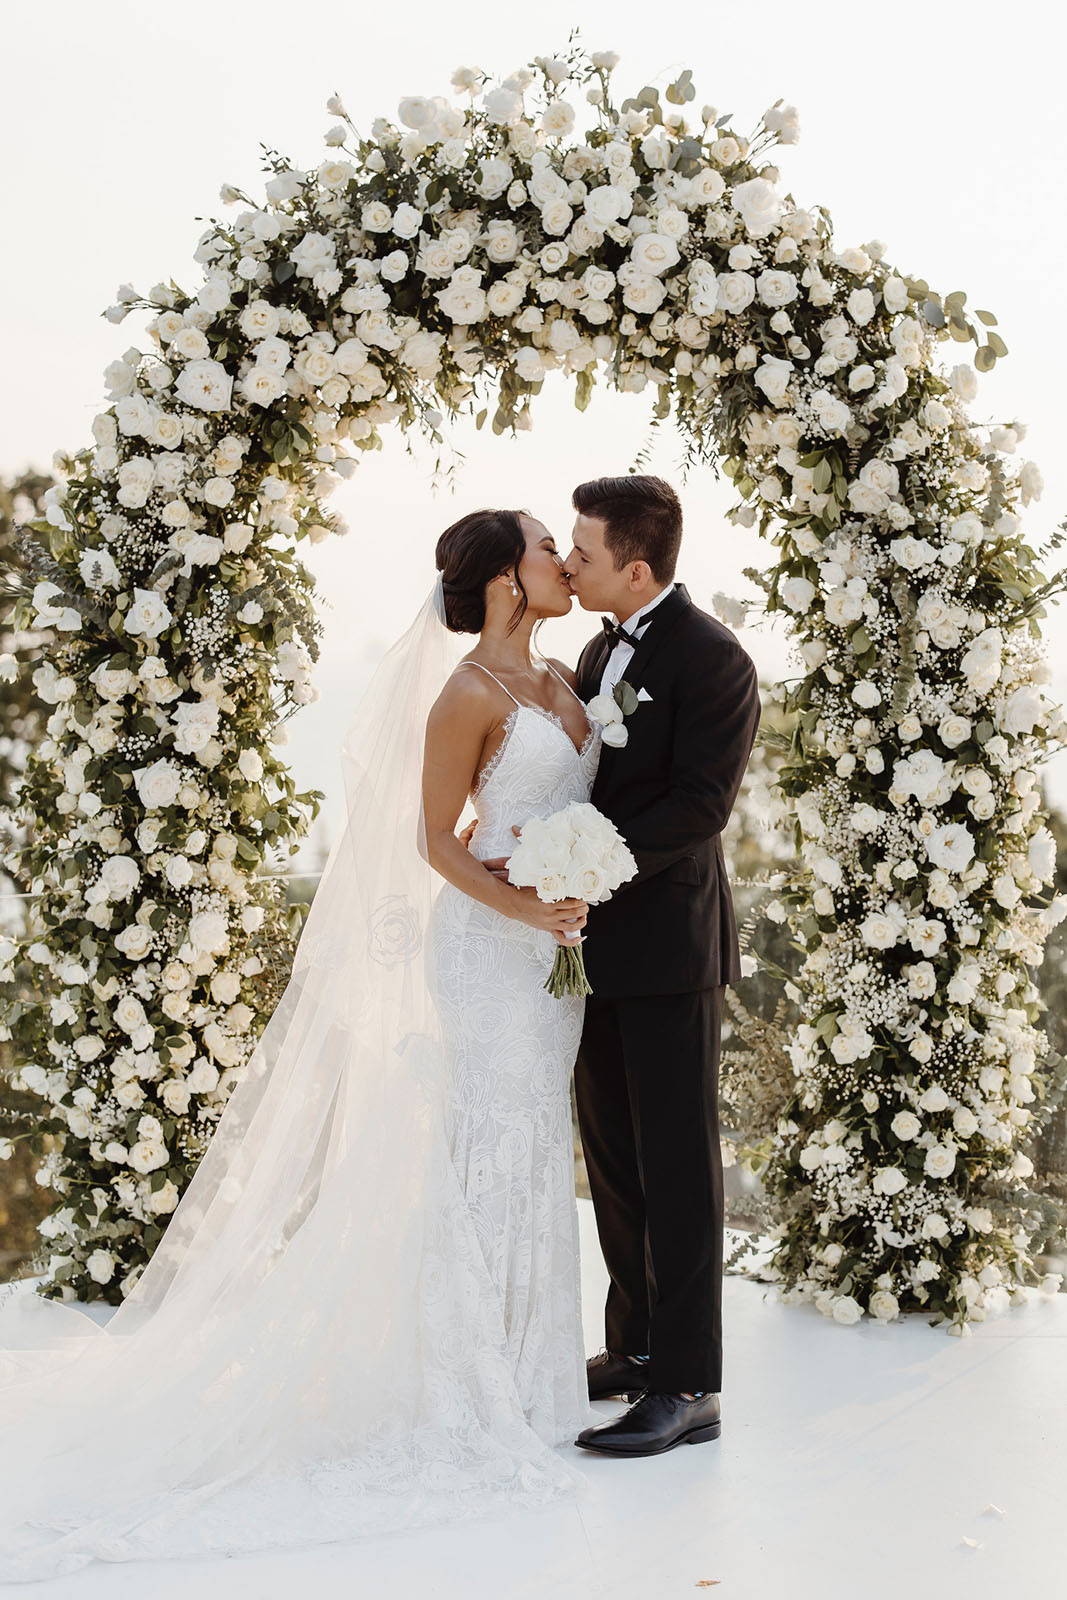 Bride and groom with white floral arched arbor